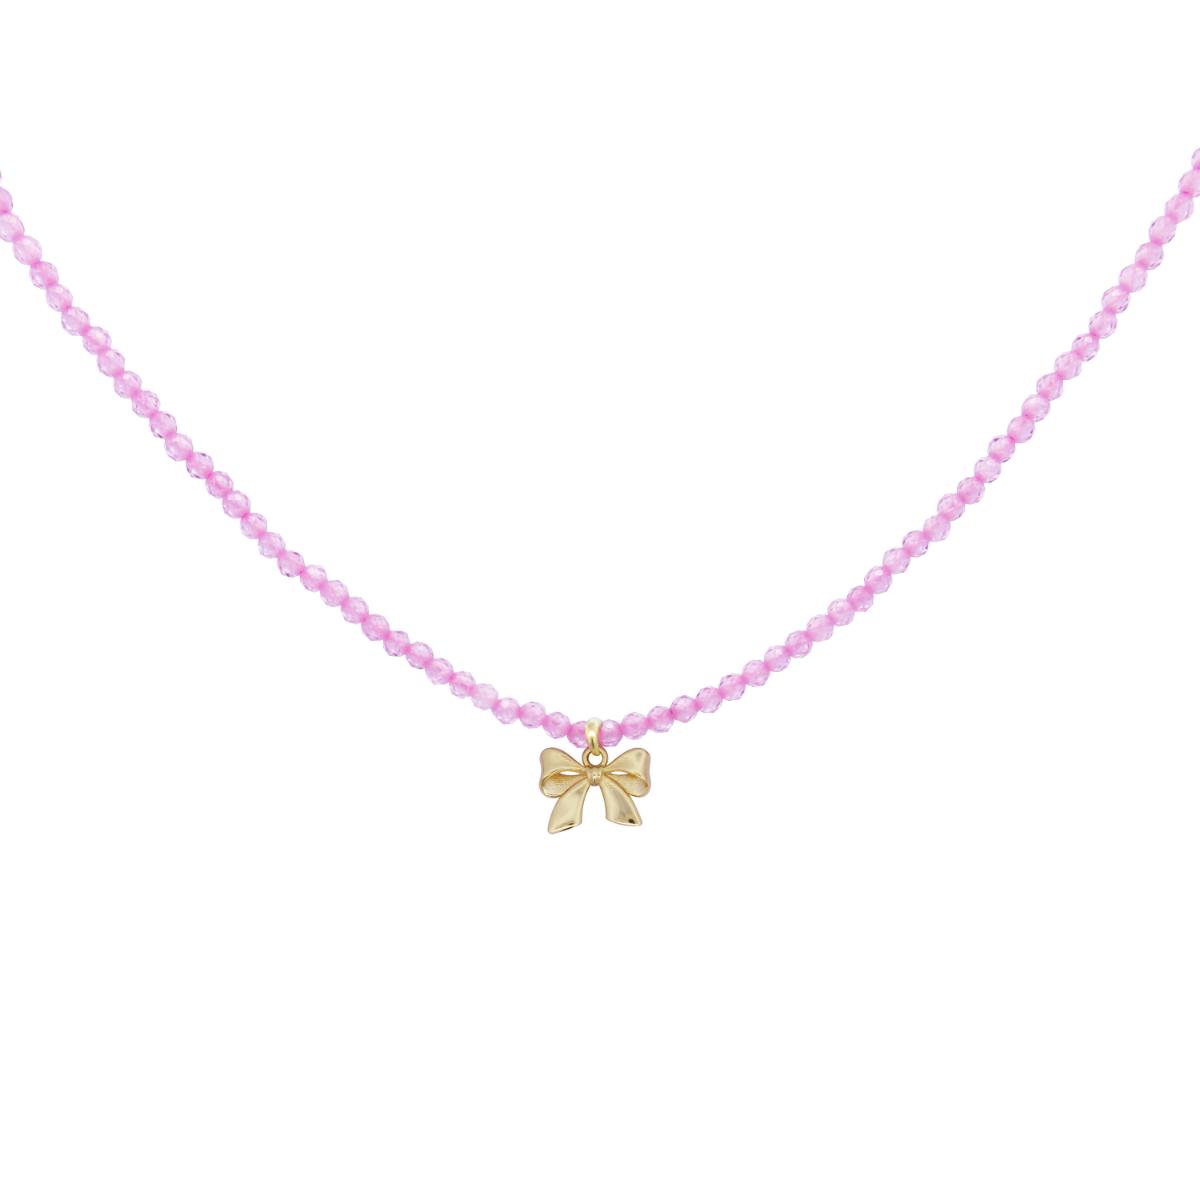 Chokers - Necklace with simple bow and thread of zirconia - CANDY BOW - 1 | Rue des Mille